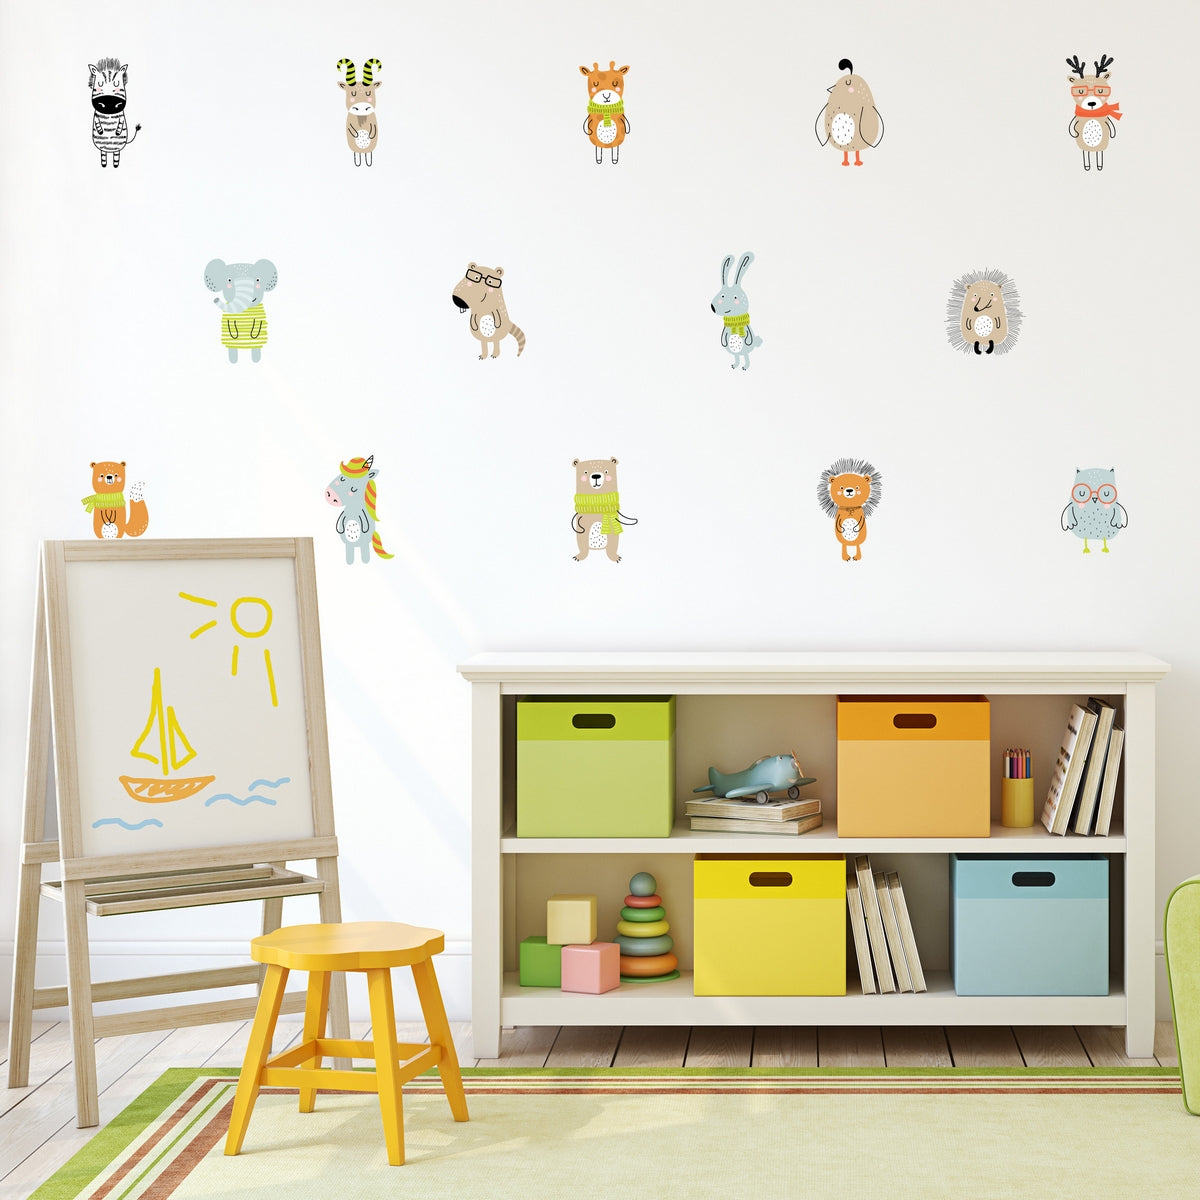 Animal-Shaped Daycare Stickers Your Kids Will Love